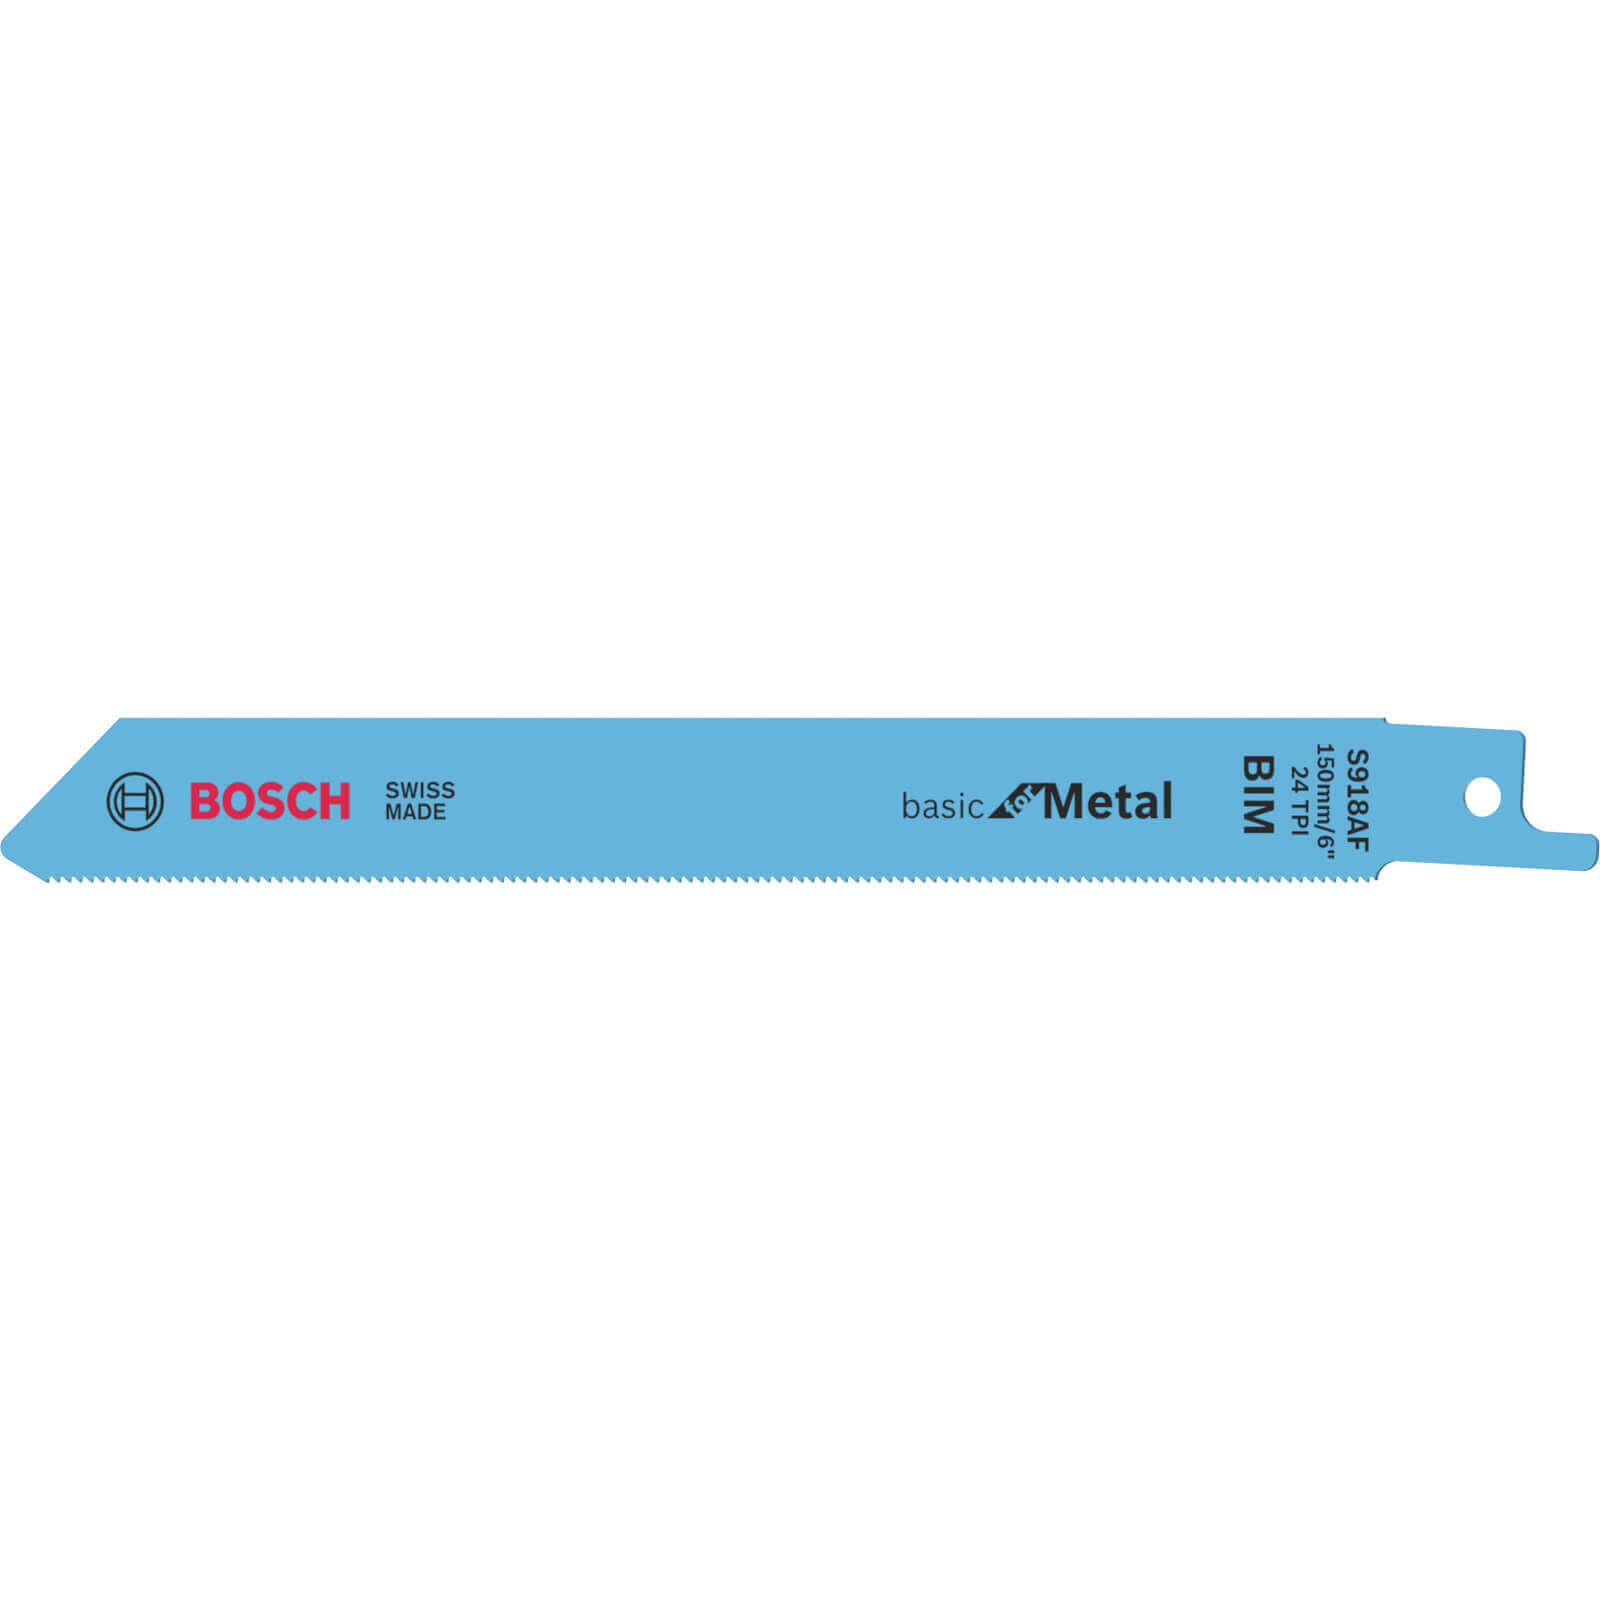 Image of Bosch S918AF Metal Cutting Reciprocating Sabre Saw Blades Pack of 5